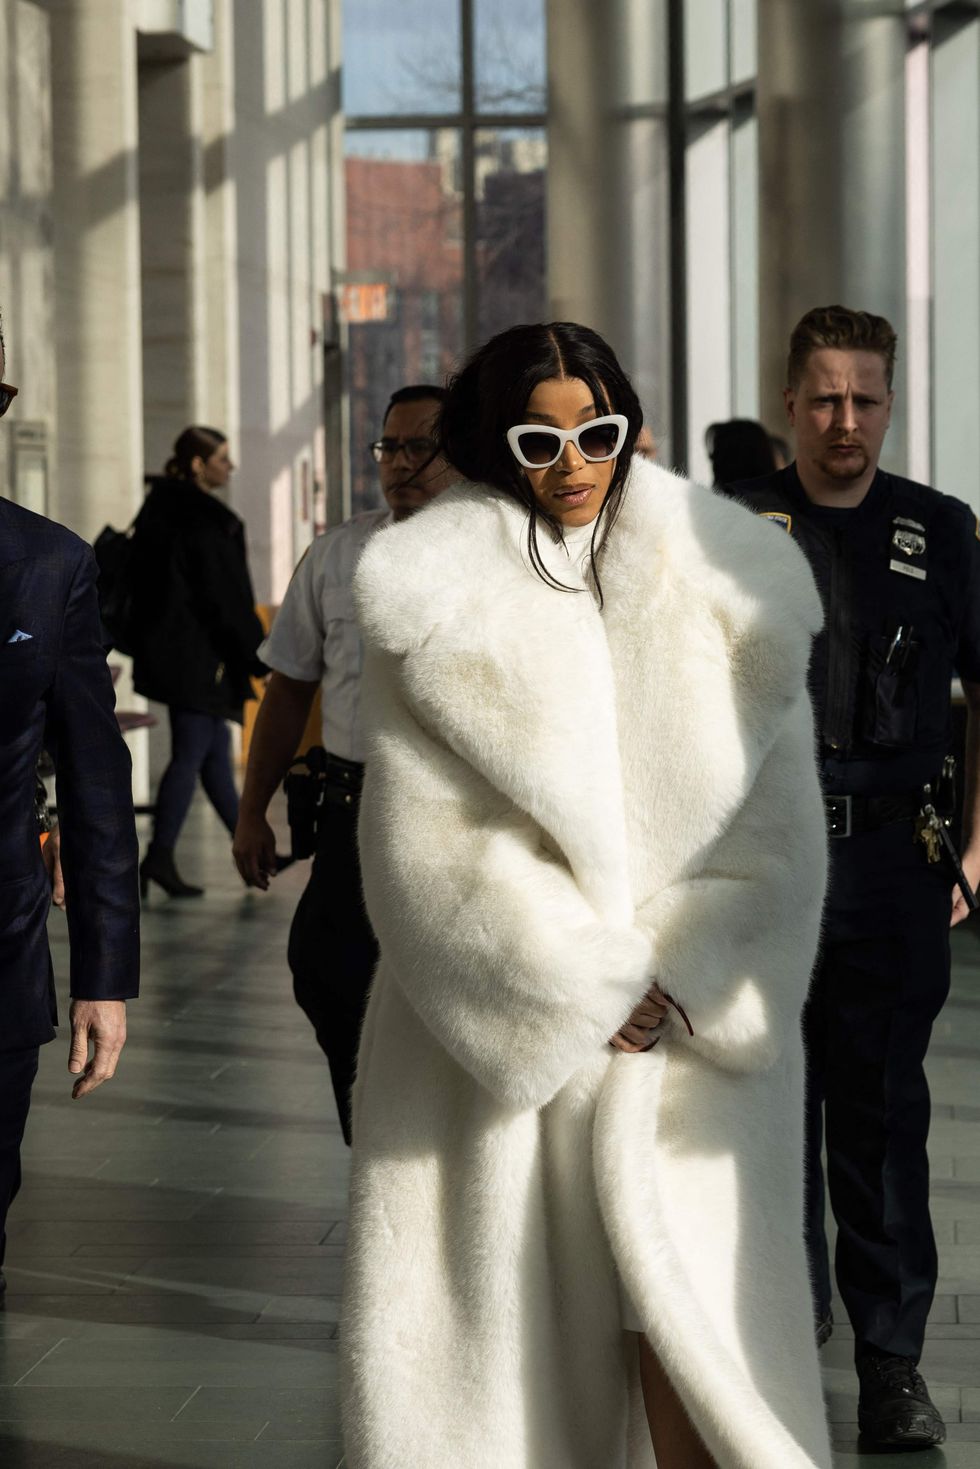 us rapper and songwriter cardi b departs after a court hearing at queens county criminal court, following a compliance hearing regarding the terms of her agreement over a strip club assault, in new york city on january 17, 2023 photo by yuki iwamura afp photo by yuki iwamuraafp via getty images